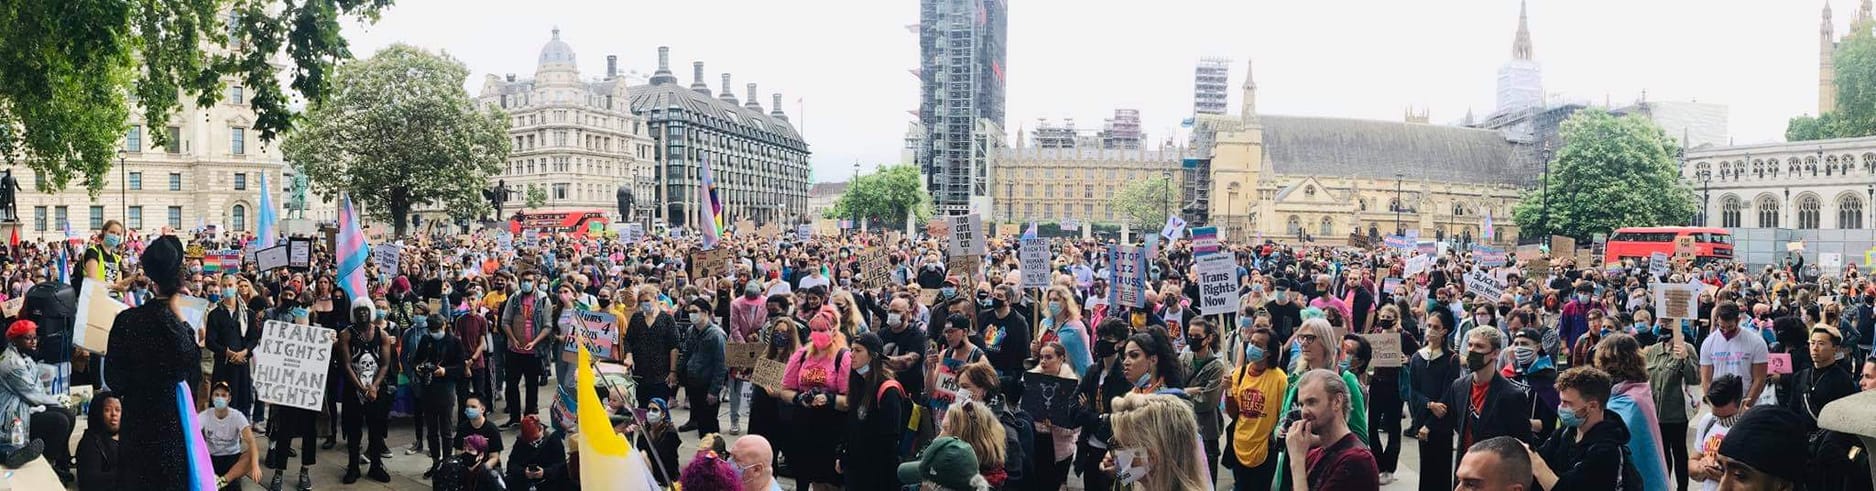 A photograph from a protest in support of trans liberation showing hundreds if not thousands of supporters.